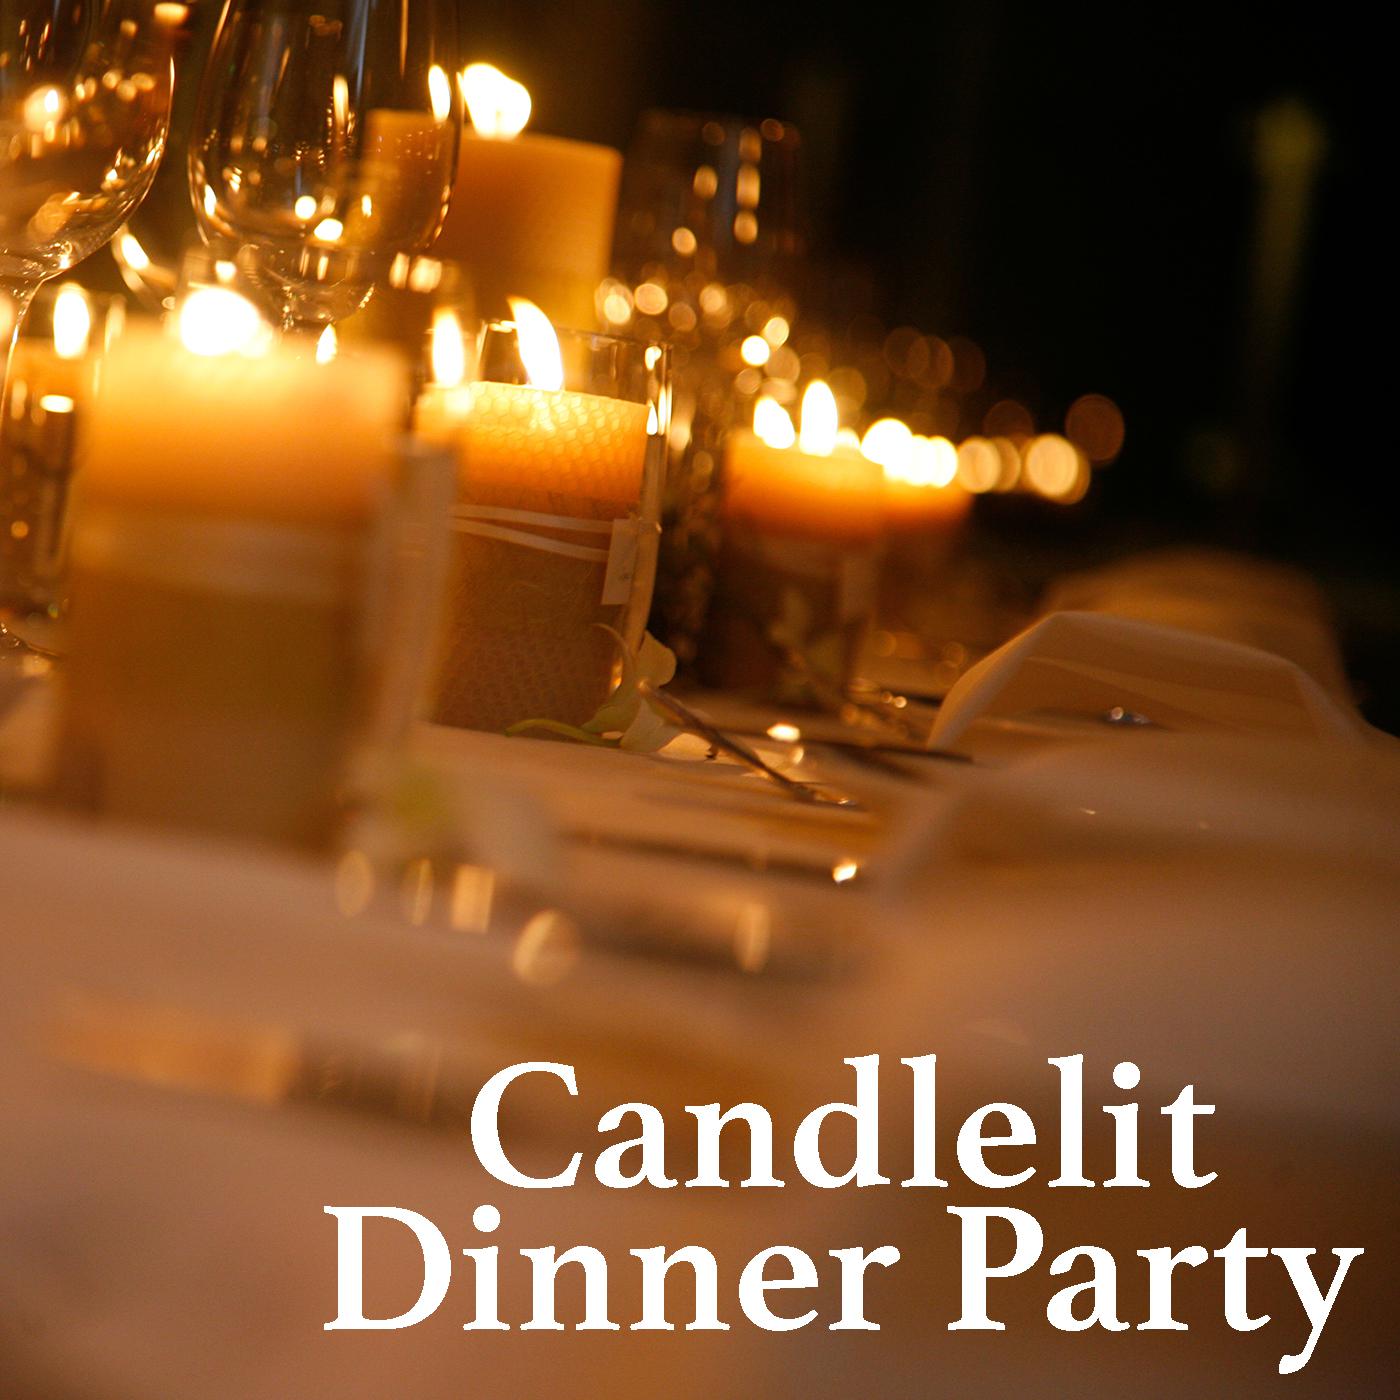 Candlelit Dinner Party